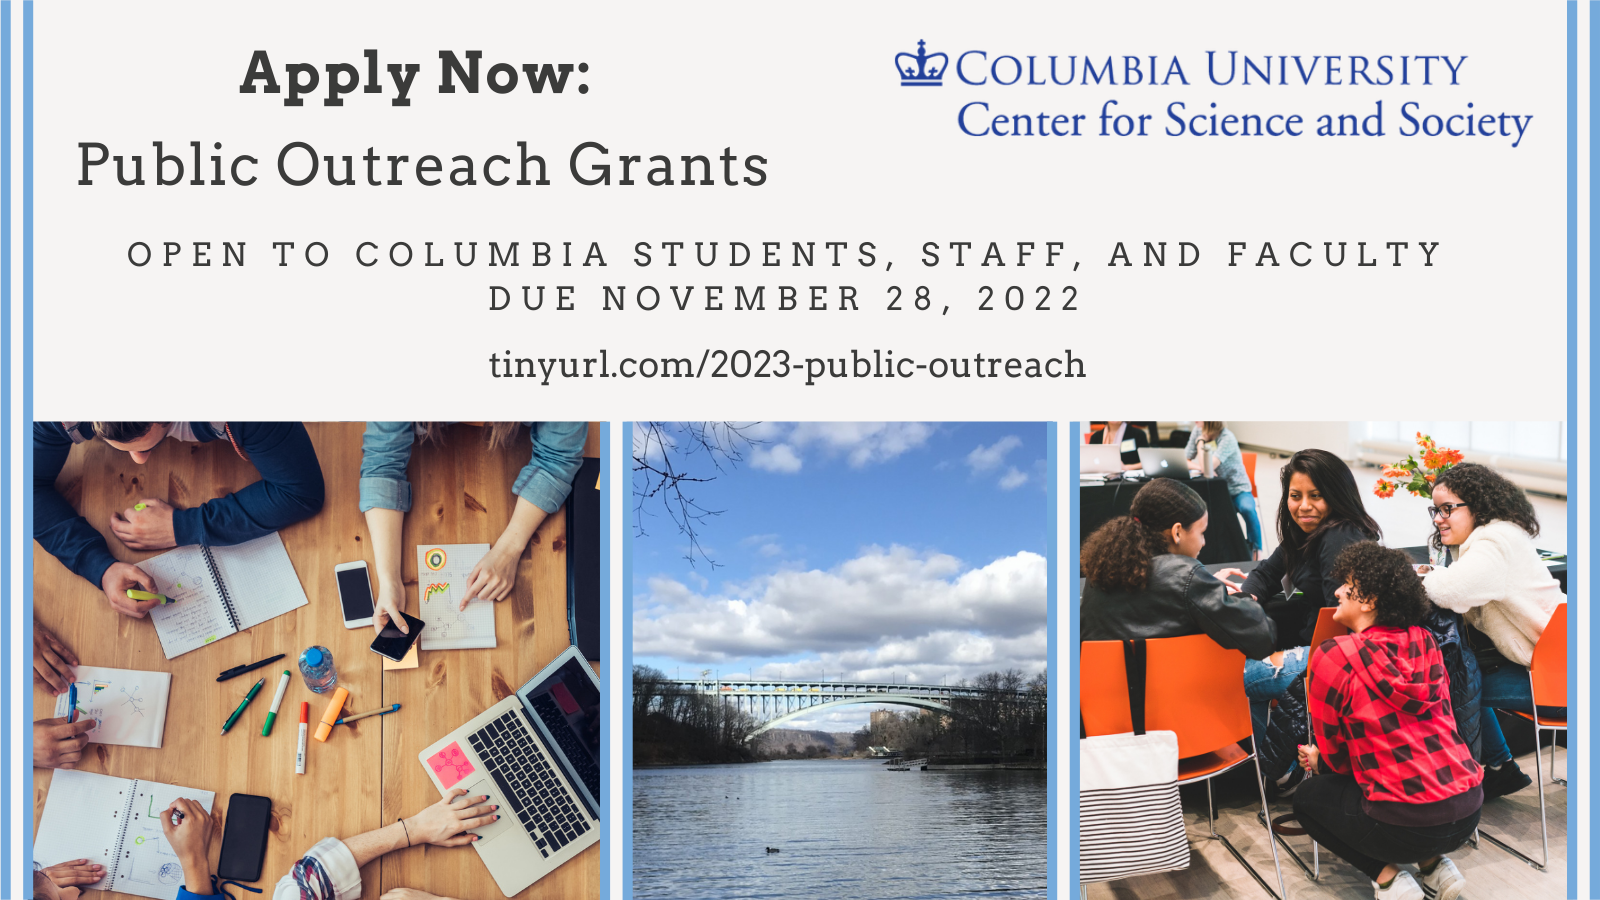 2023 Public outreach grants due November 28. With photos of students working together and a river. 